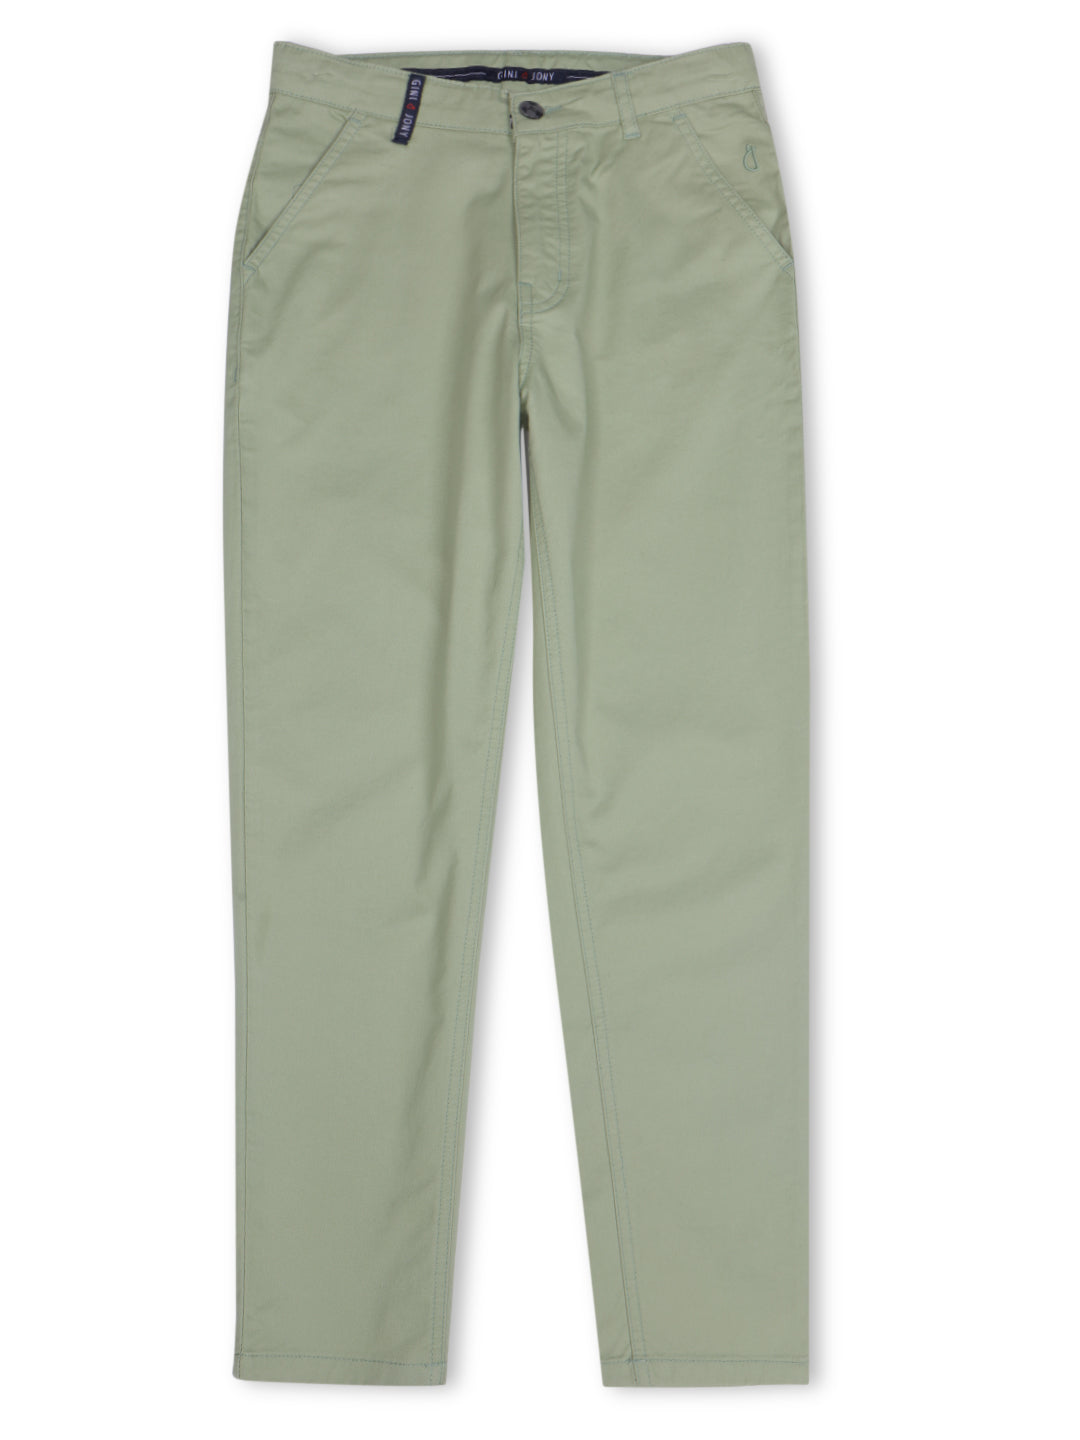 Boys Hedge Green Cotton Solid Trouser